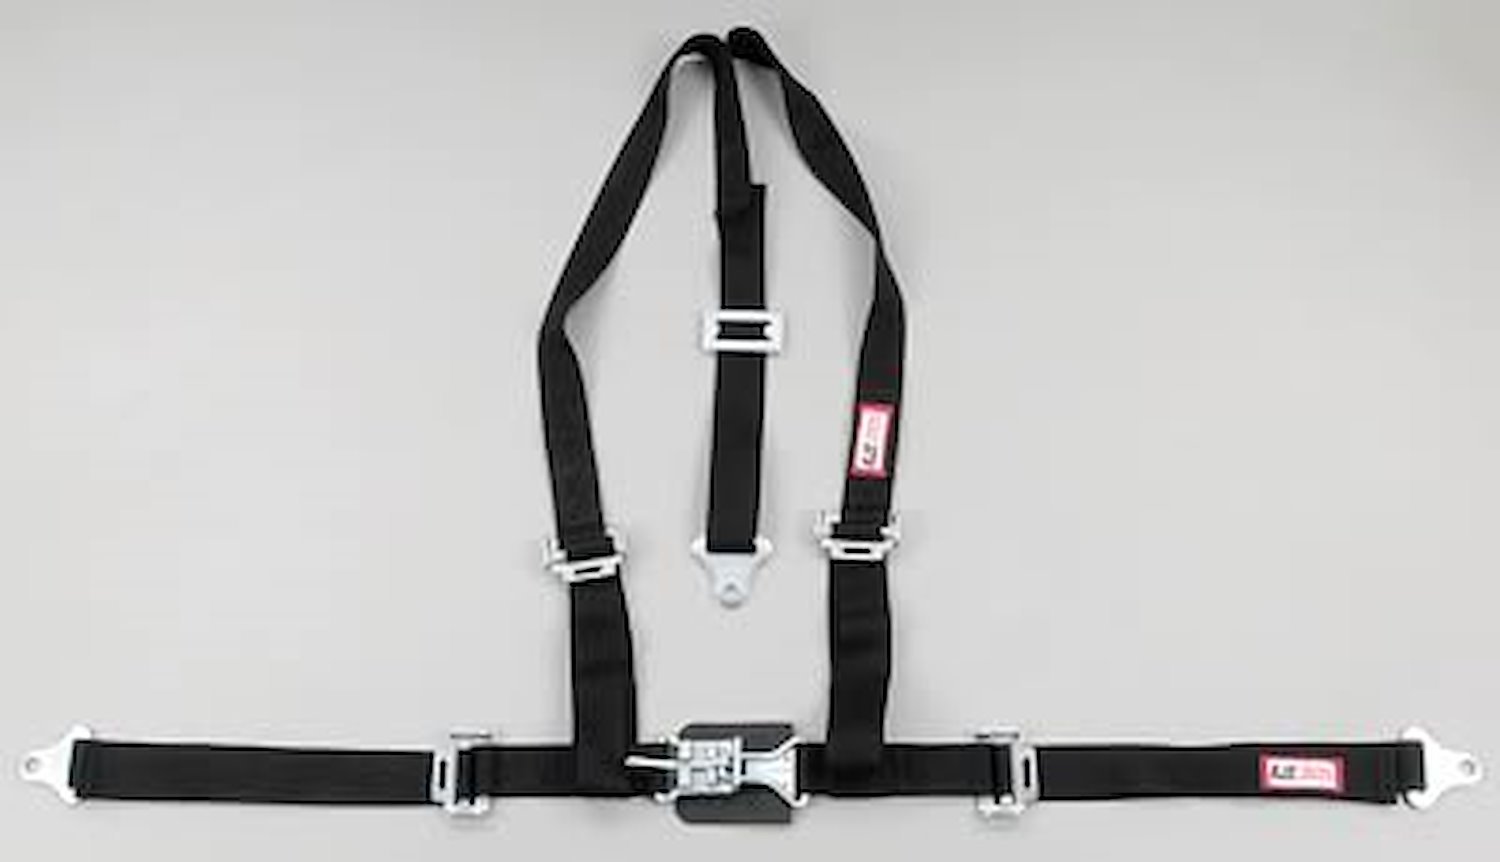 NON-SFI L&L HARNESS 2 PULL UP Lap Belt w/Adjuster 2 S.H. Y FLOOR MOUNT w/STERNUM STRAP ALL WRAP ENDS BLUE